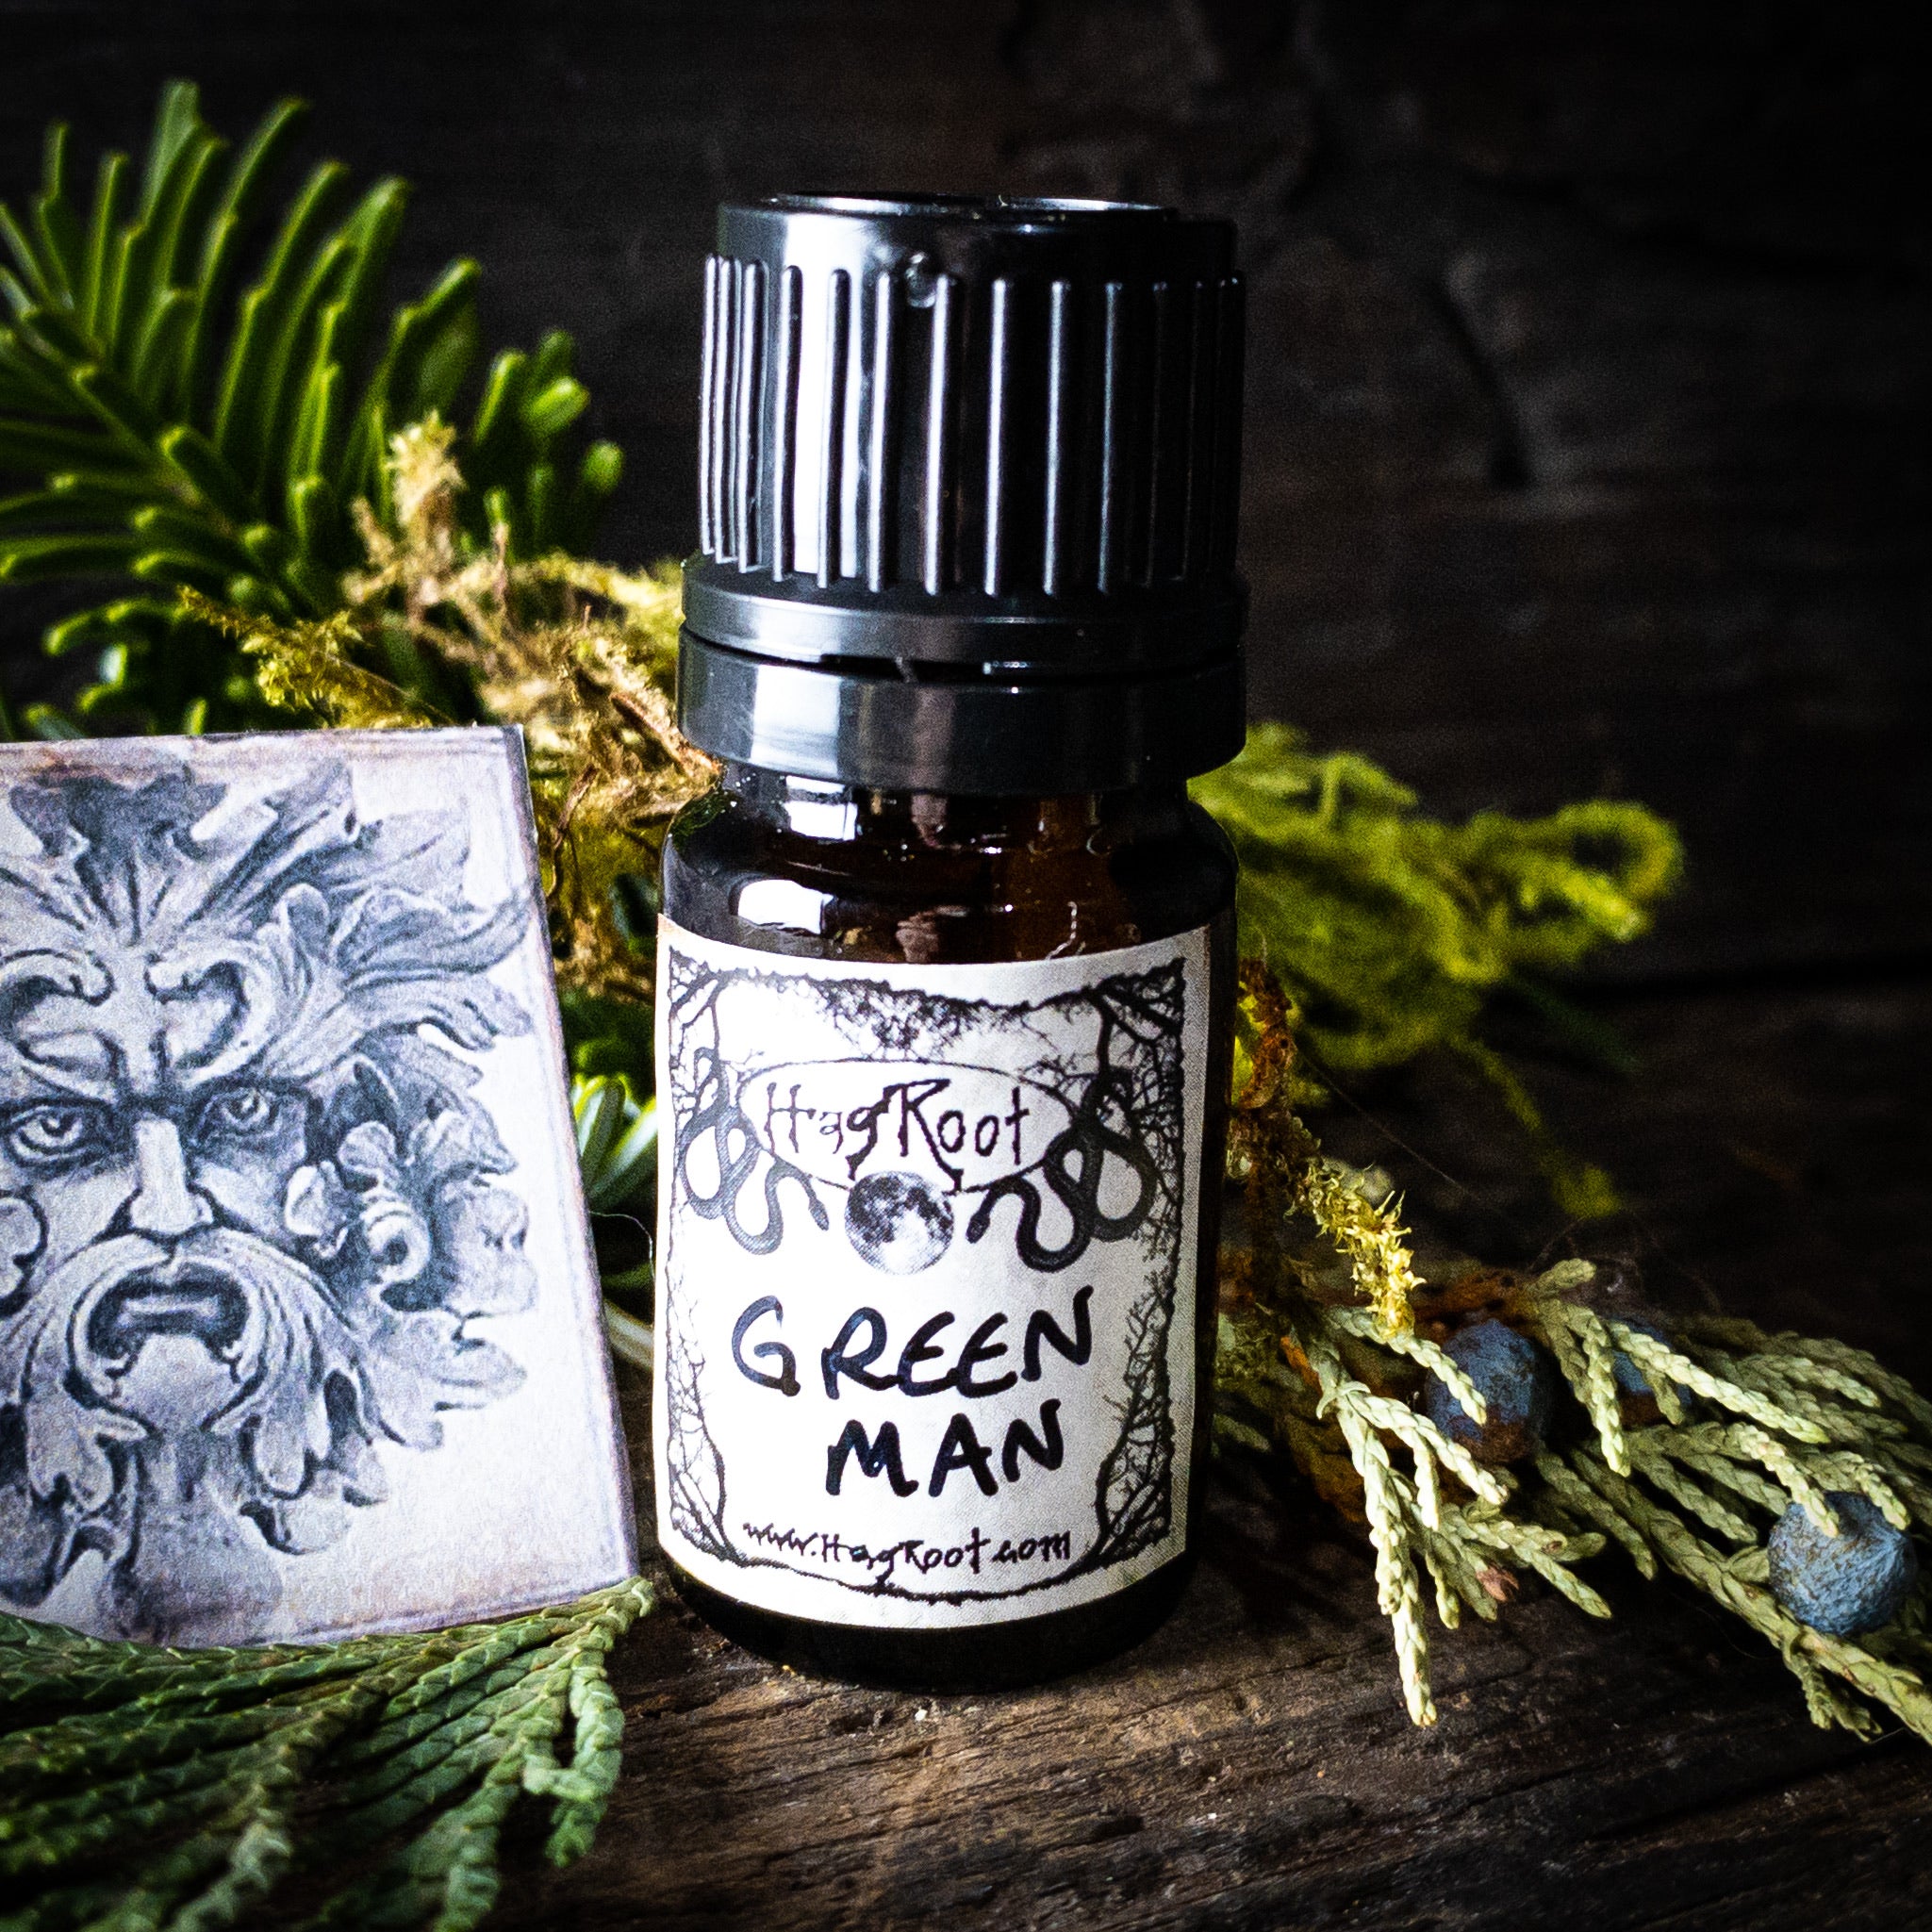 GREEN MAN-(Vetiver, Grass, Cedar, Peppercorn, Patchouli)-Perfume, Cologne, Anointing, Ritual Oil